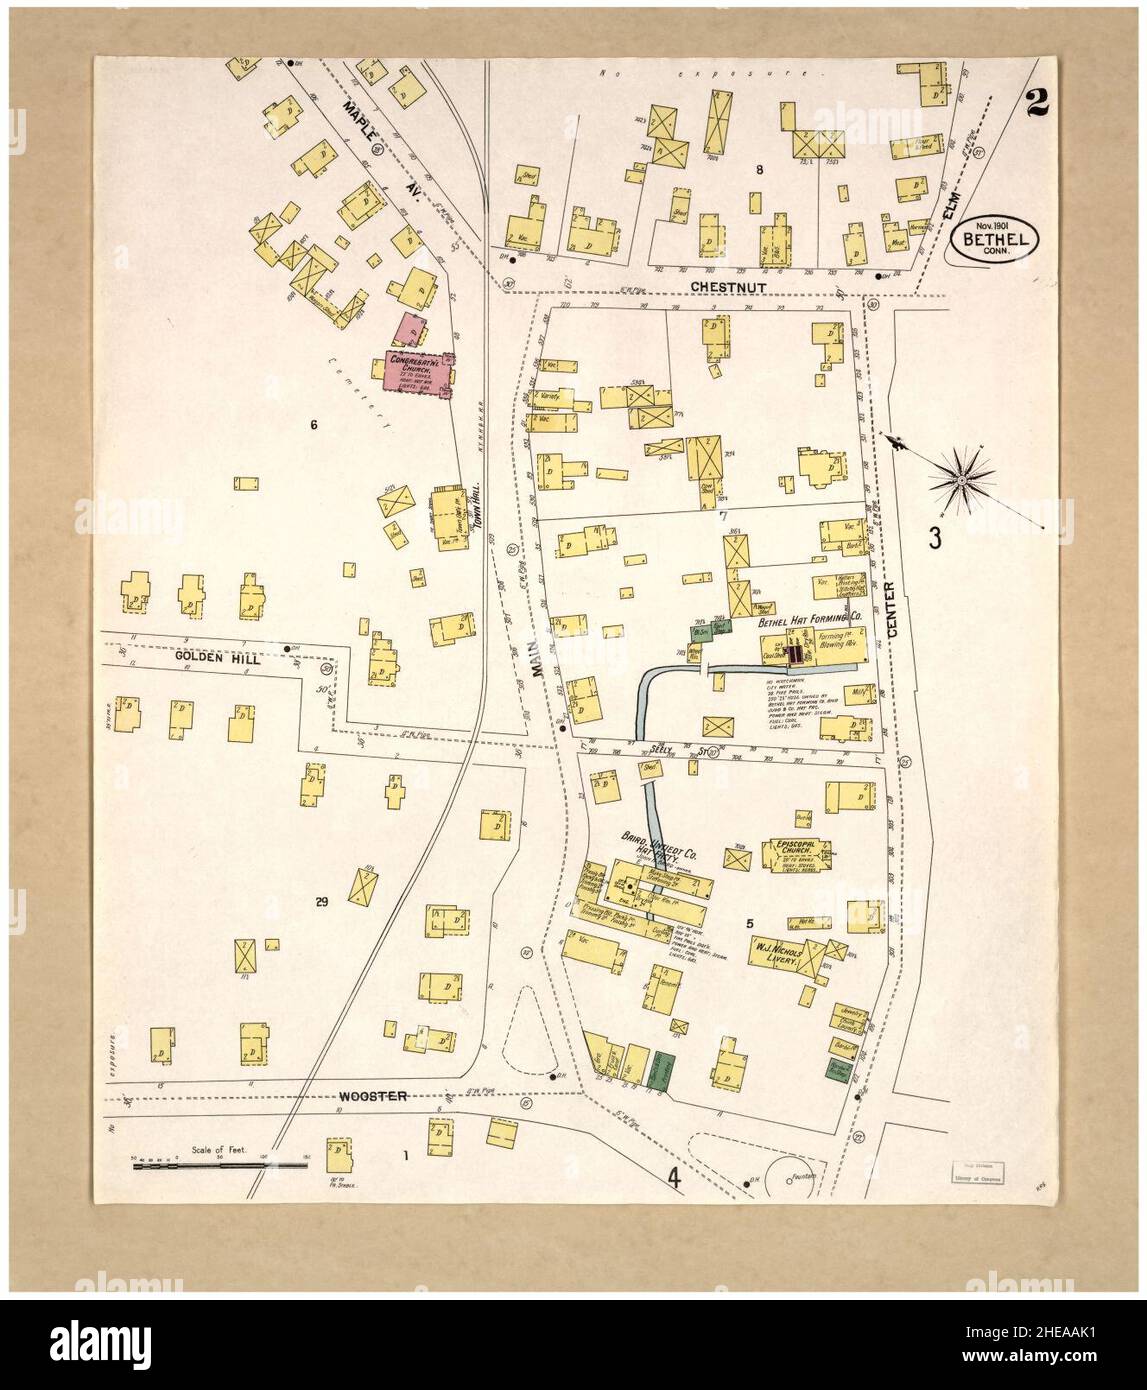 Sanborn Fire Insurance Map from Bethel, Fairfield County, Connecticut. Stock Photo